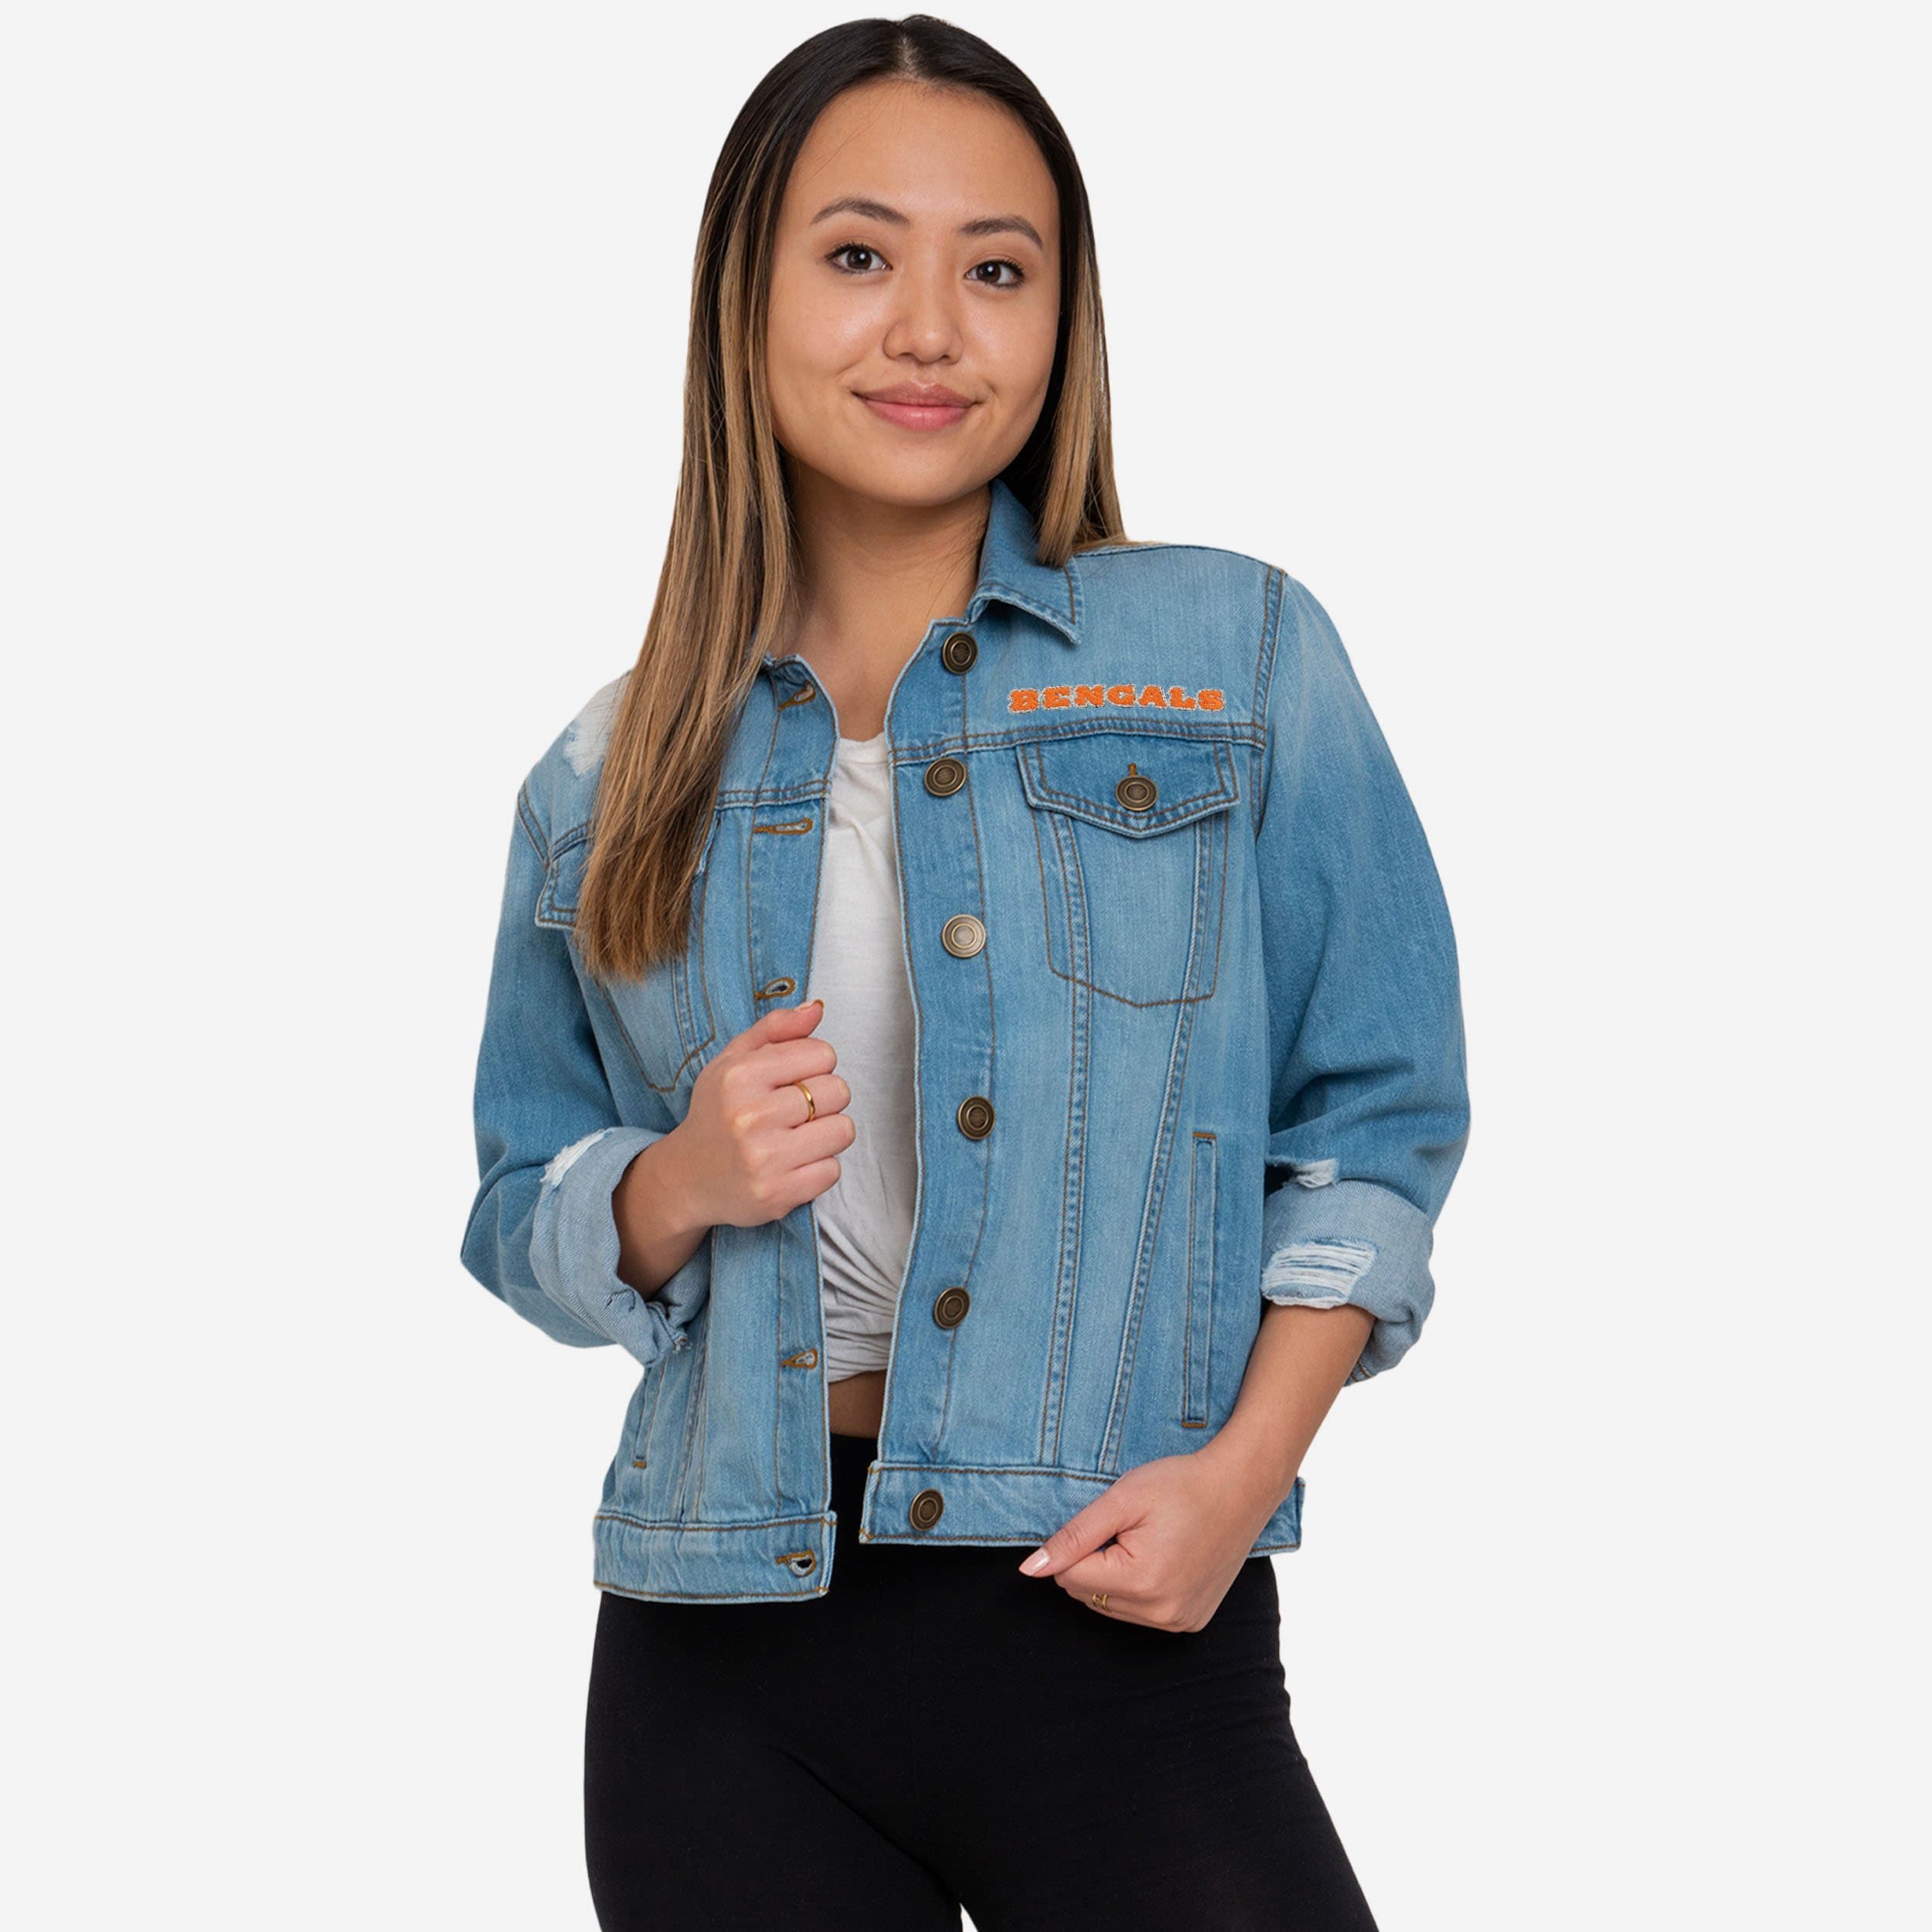 Officially Licensed NFL Women's First Finish Denim Jacket by Glll - Bengals